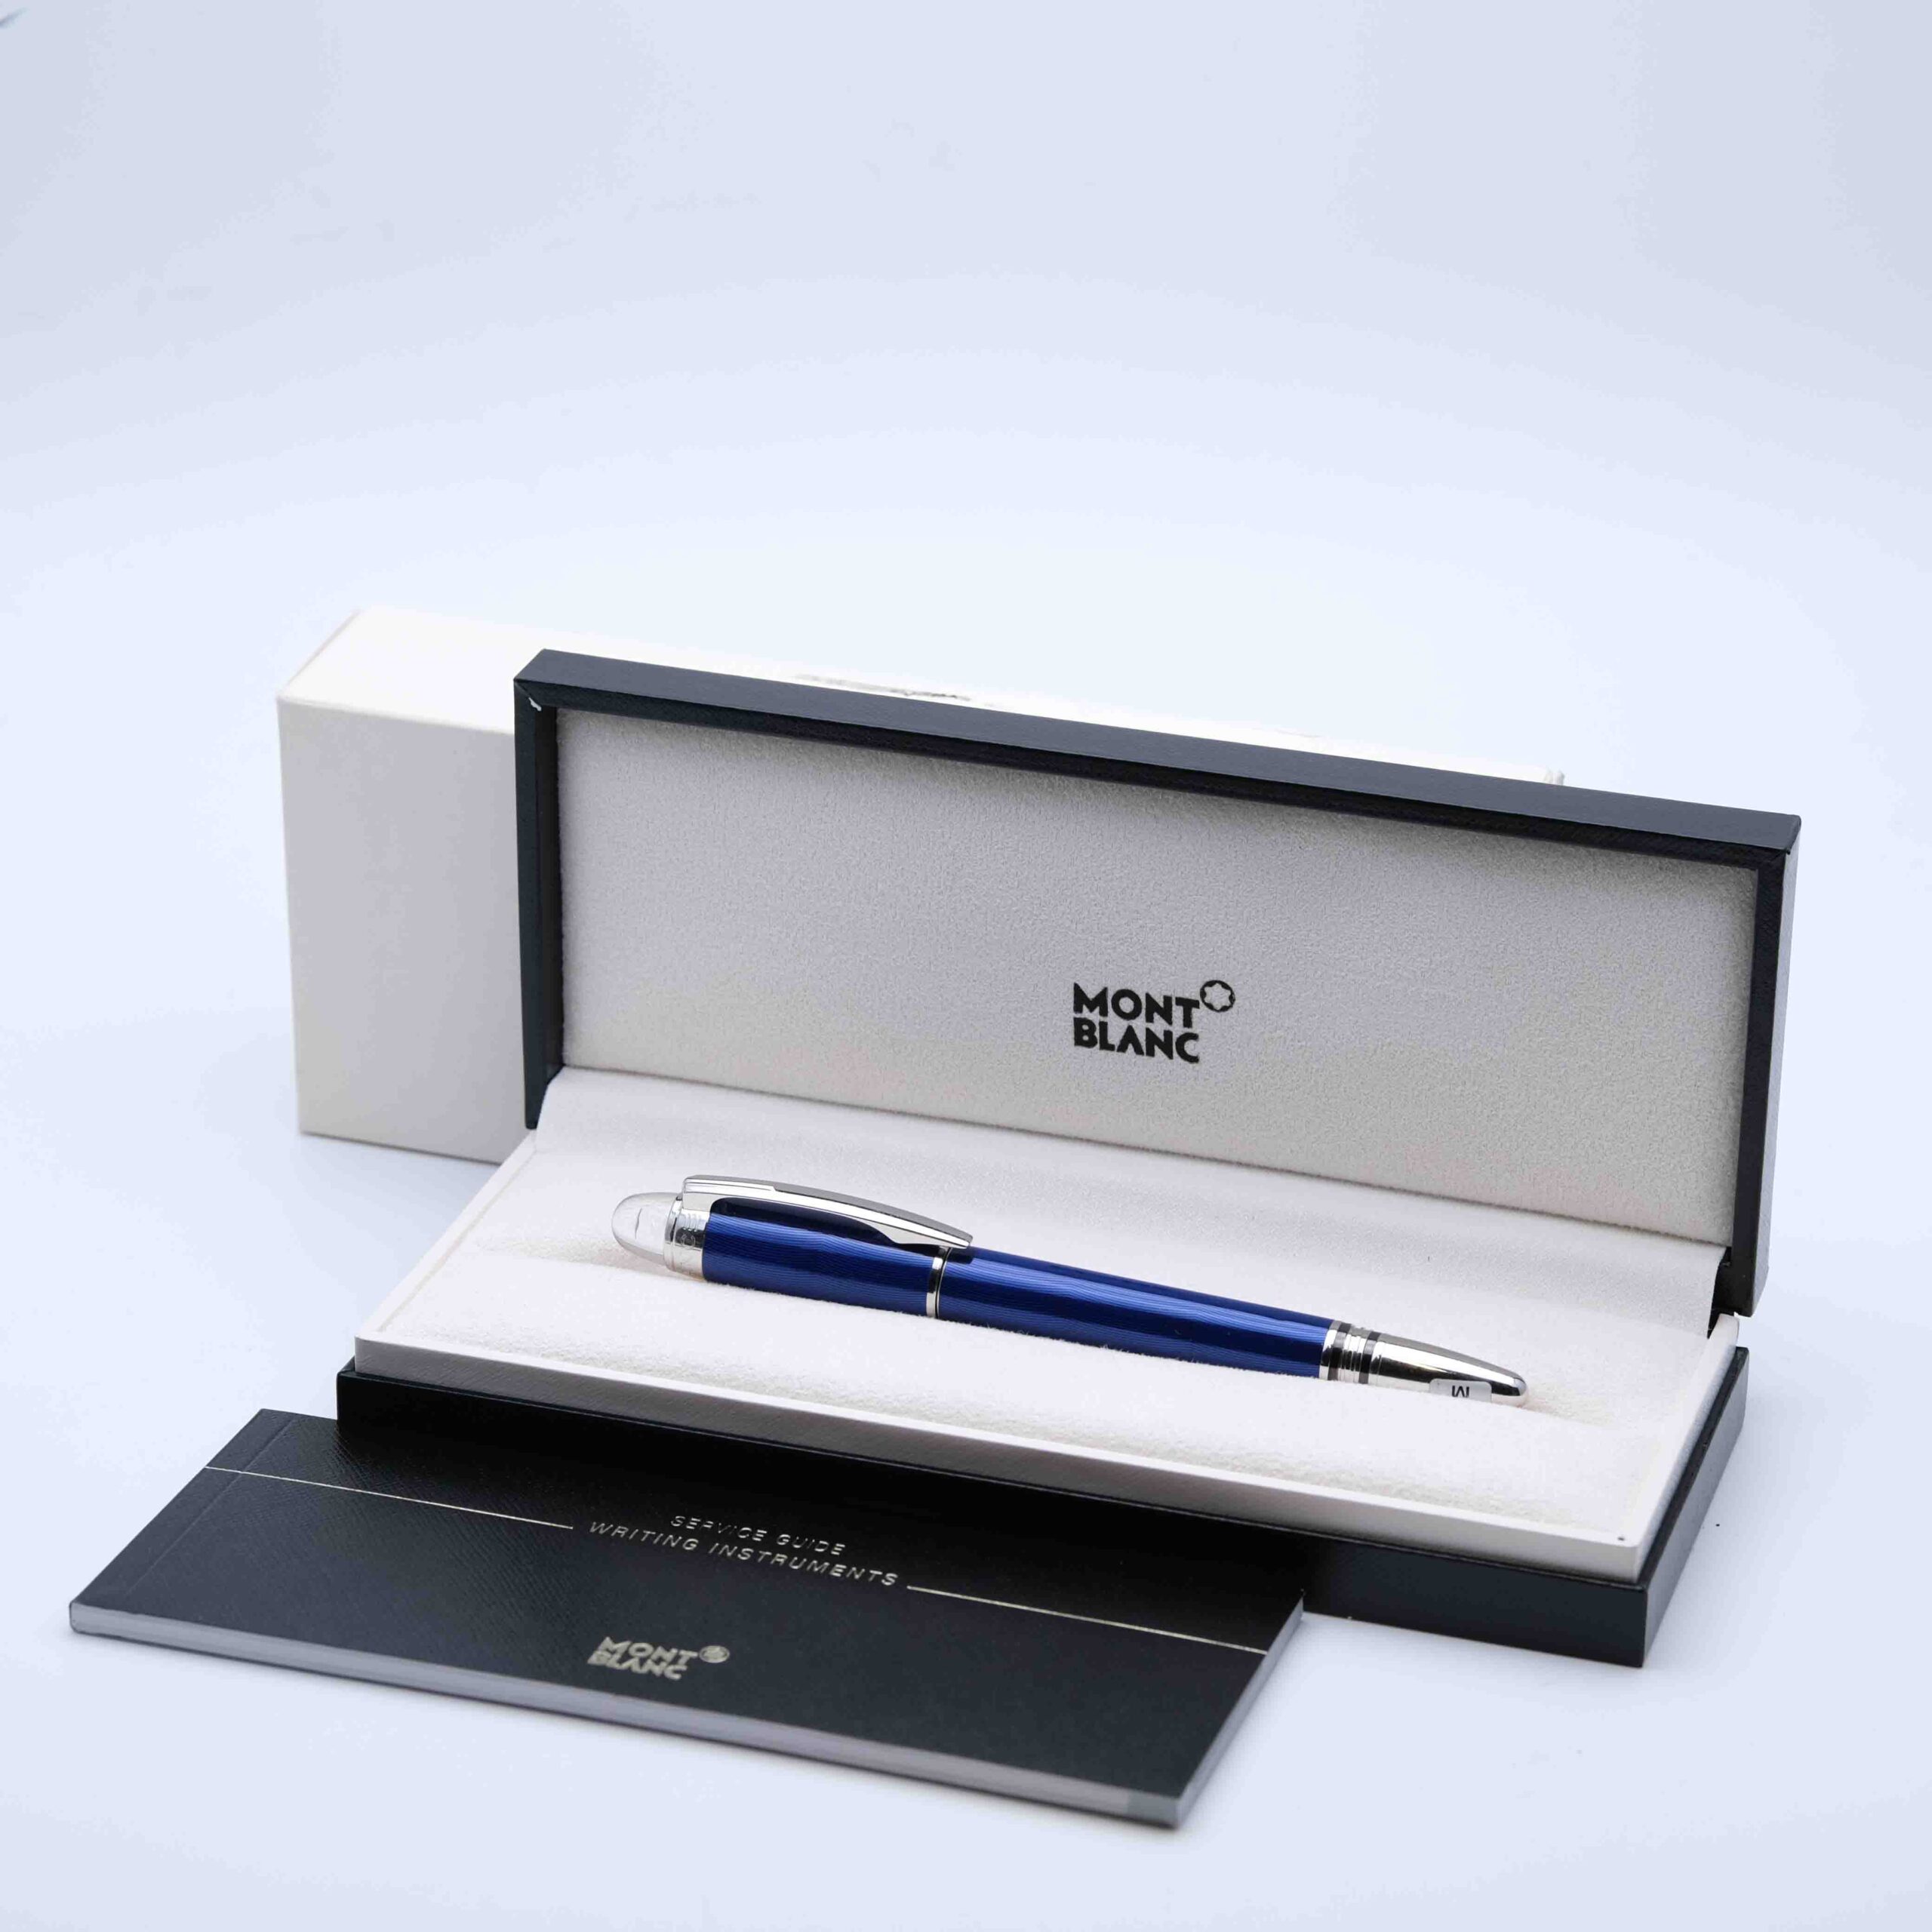 MB0565 - Montblanc - Star walker cool blue - Collectible fountain pens & more-1